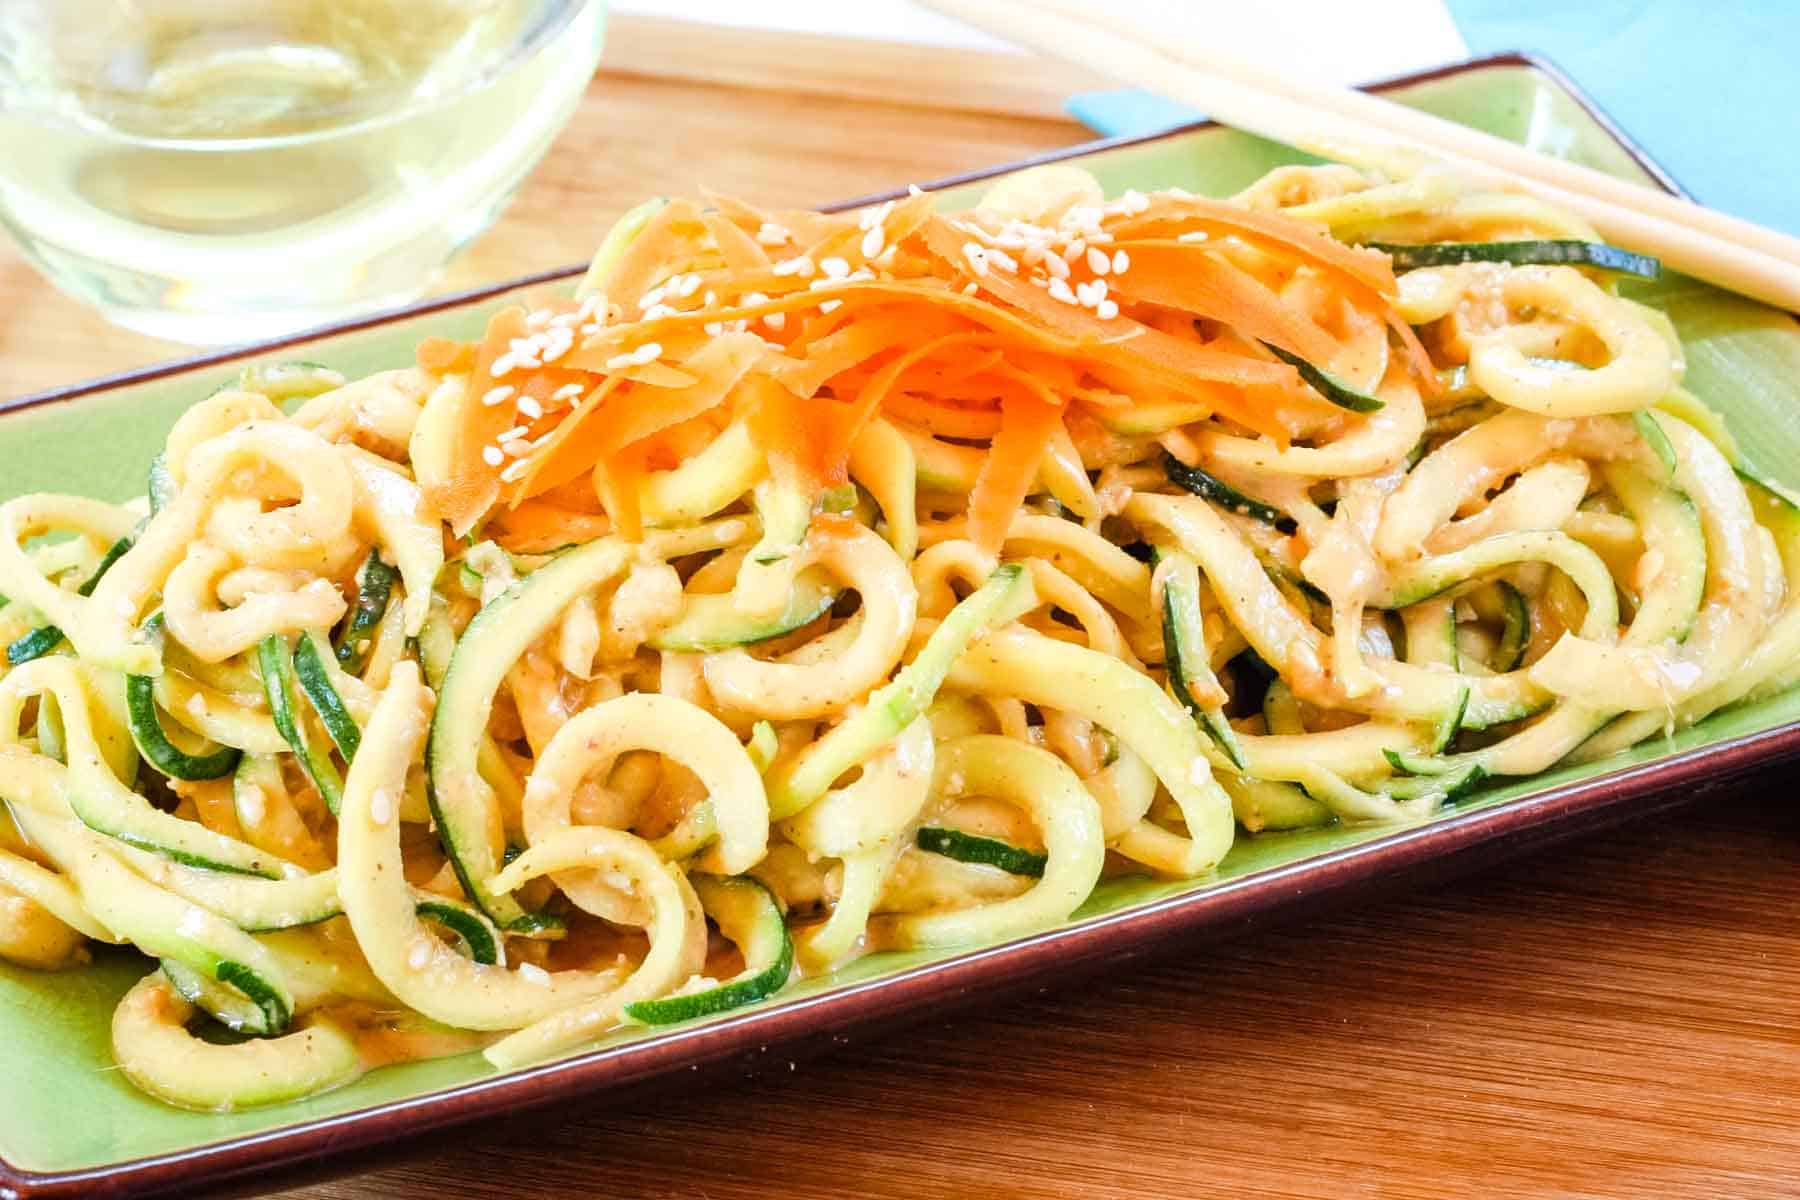 Cold Sesame Peanut Zucchini Noodles Salad topped with shredded carrots and sesame seeds on a green plate.